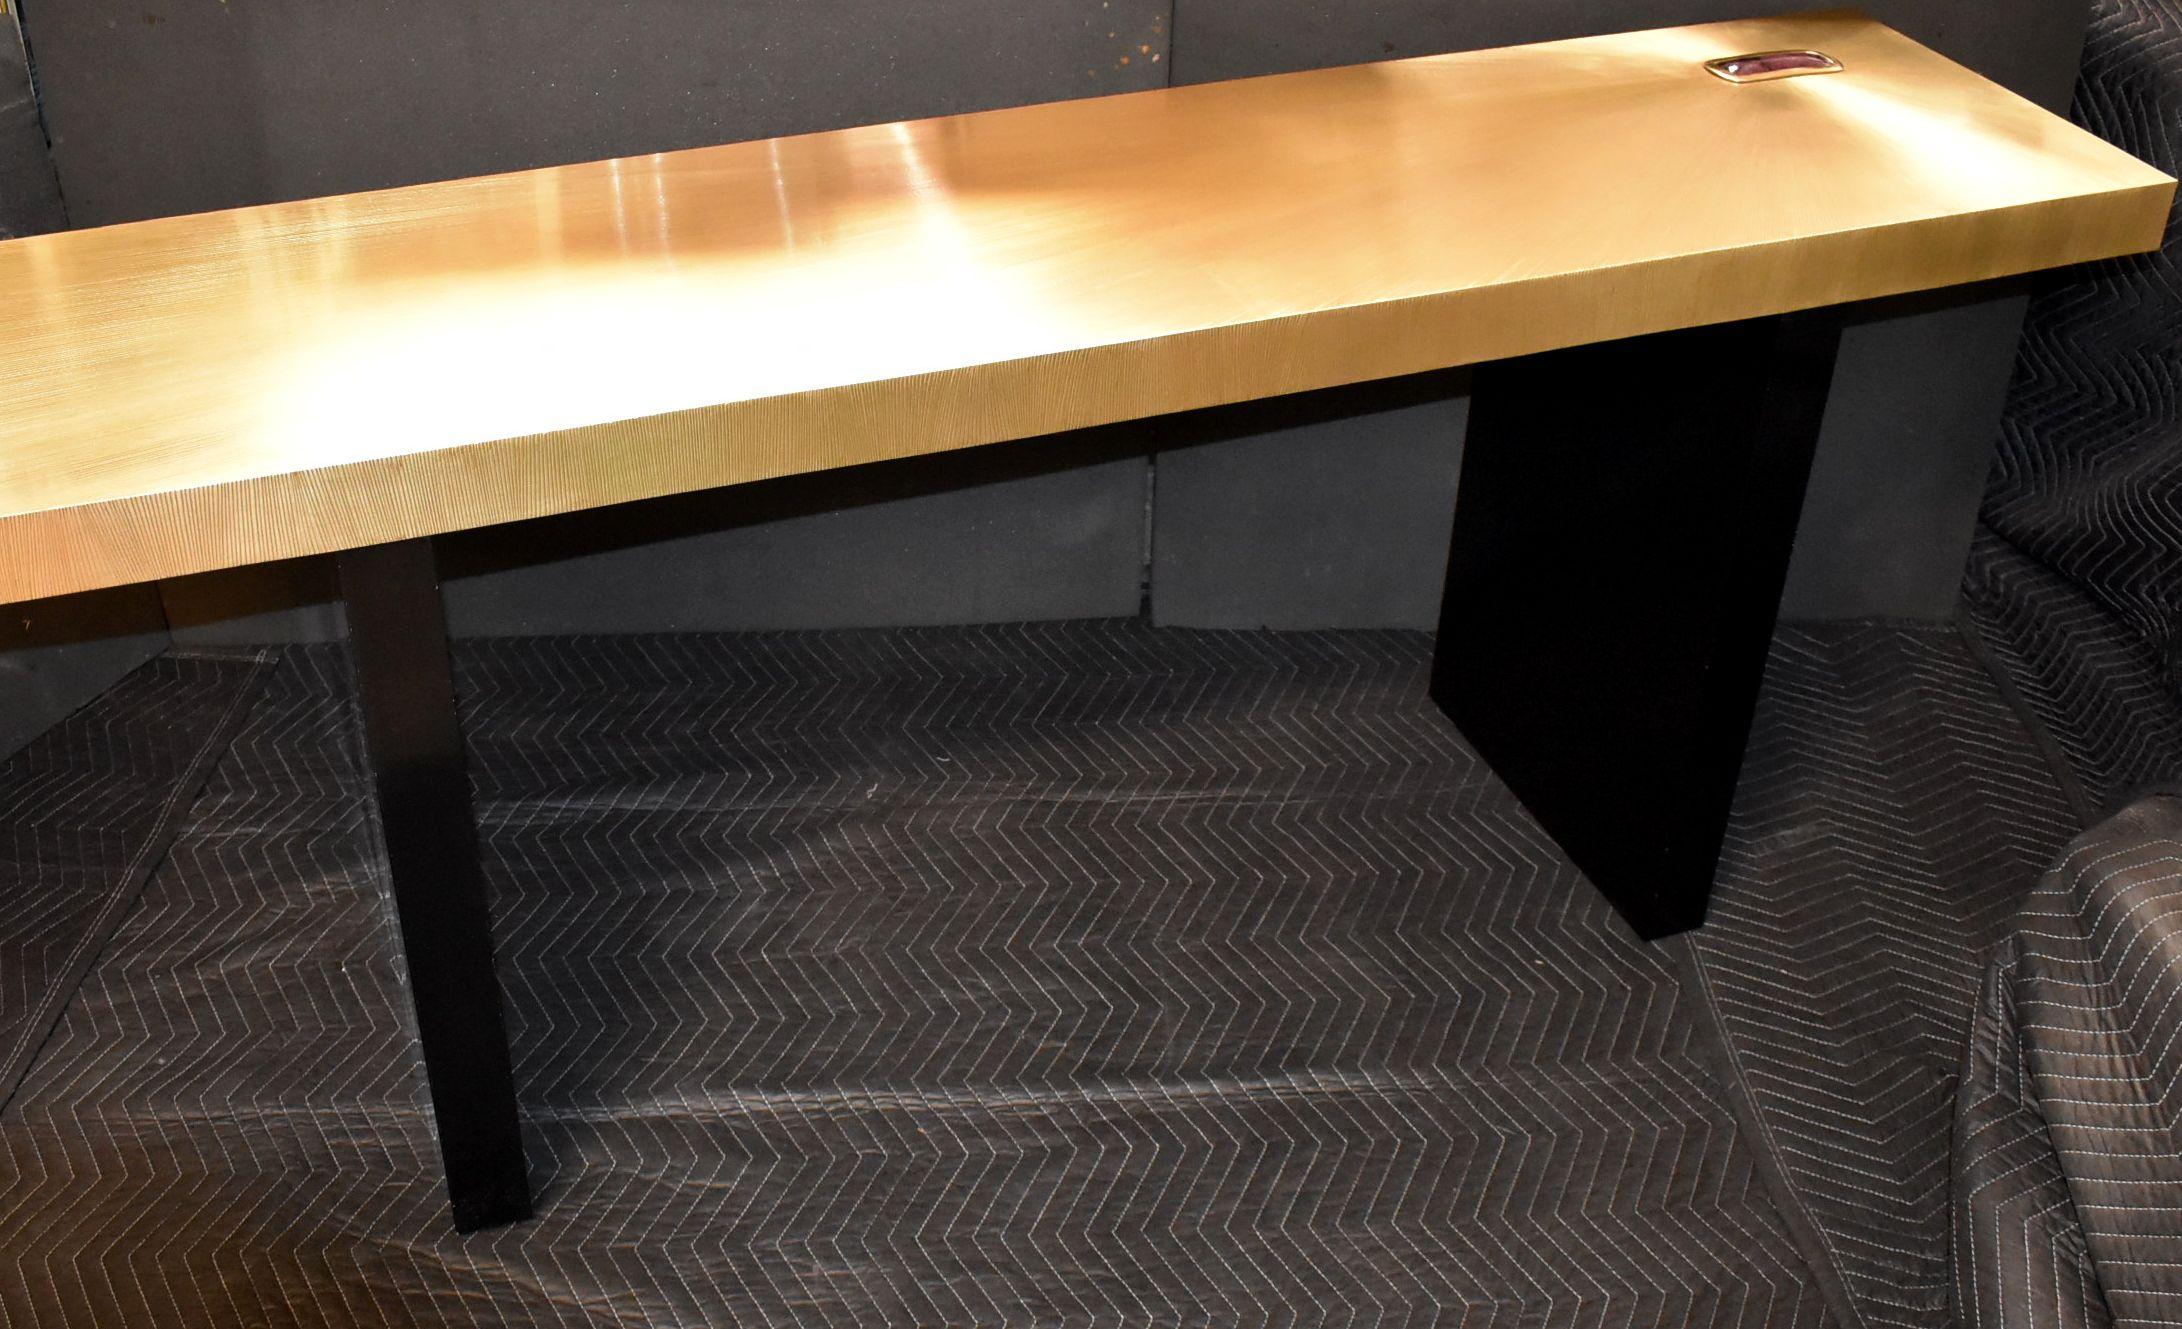 Modern solid brass-clad top with goatskin detail console table. Black painted with resin finish legs.

Please note: Two small scratches on legs see details picture and vintage finish on brass top.